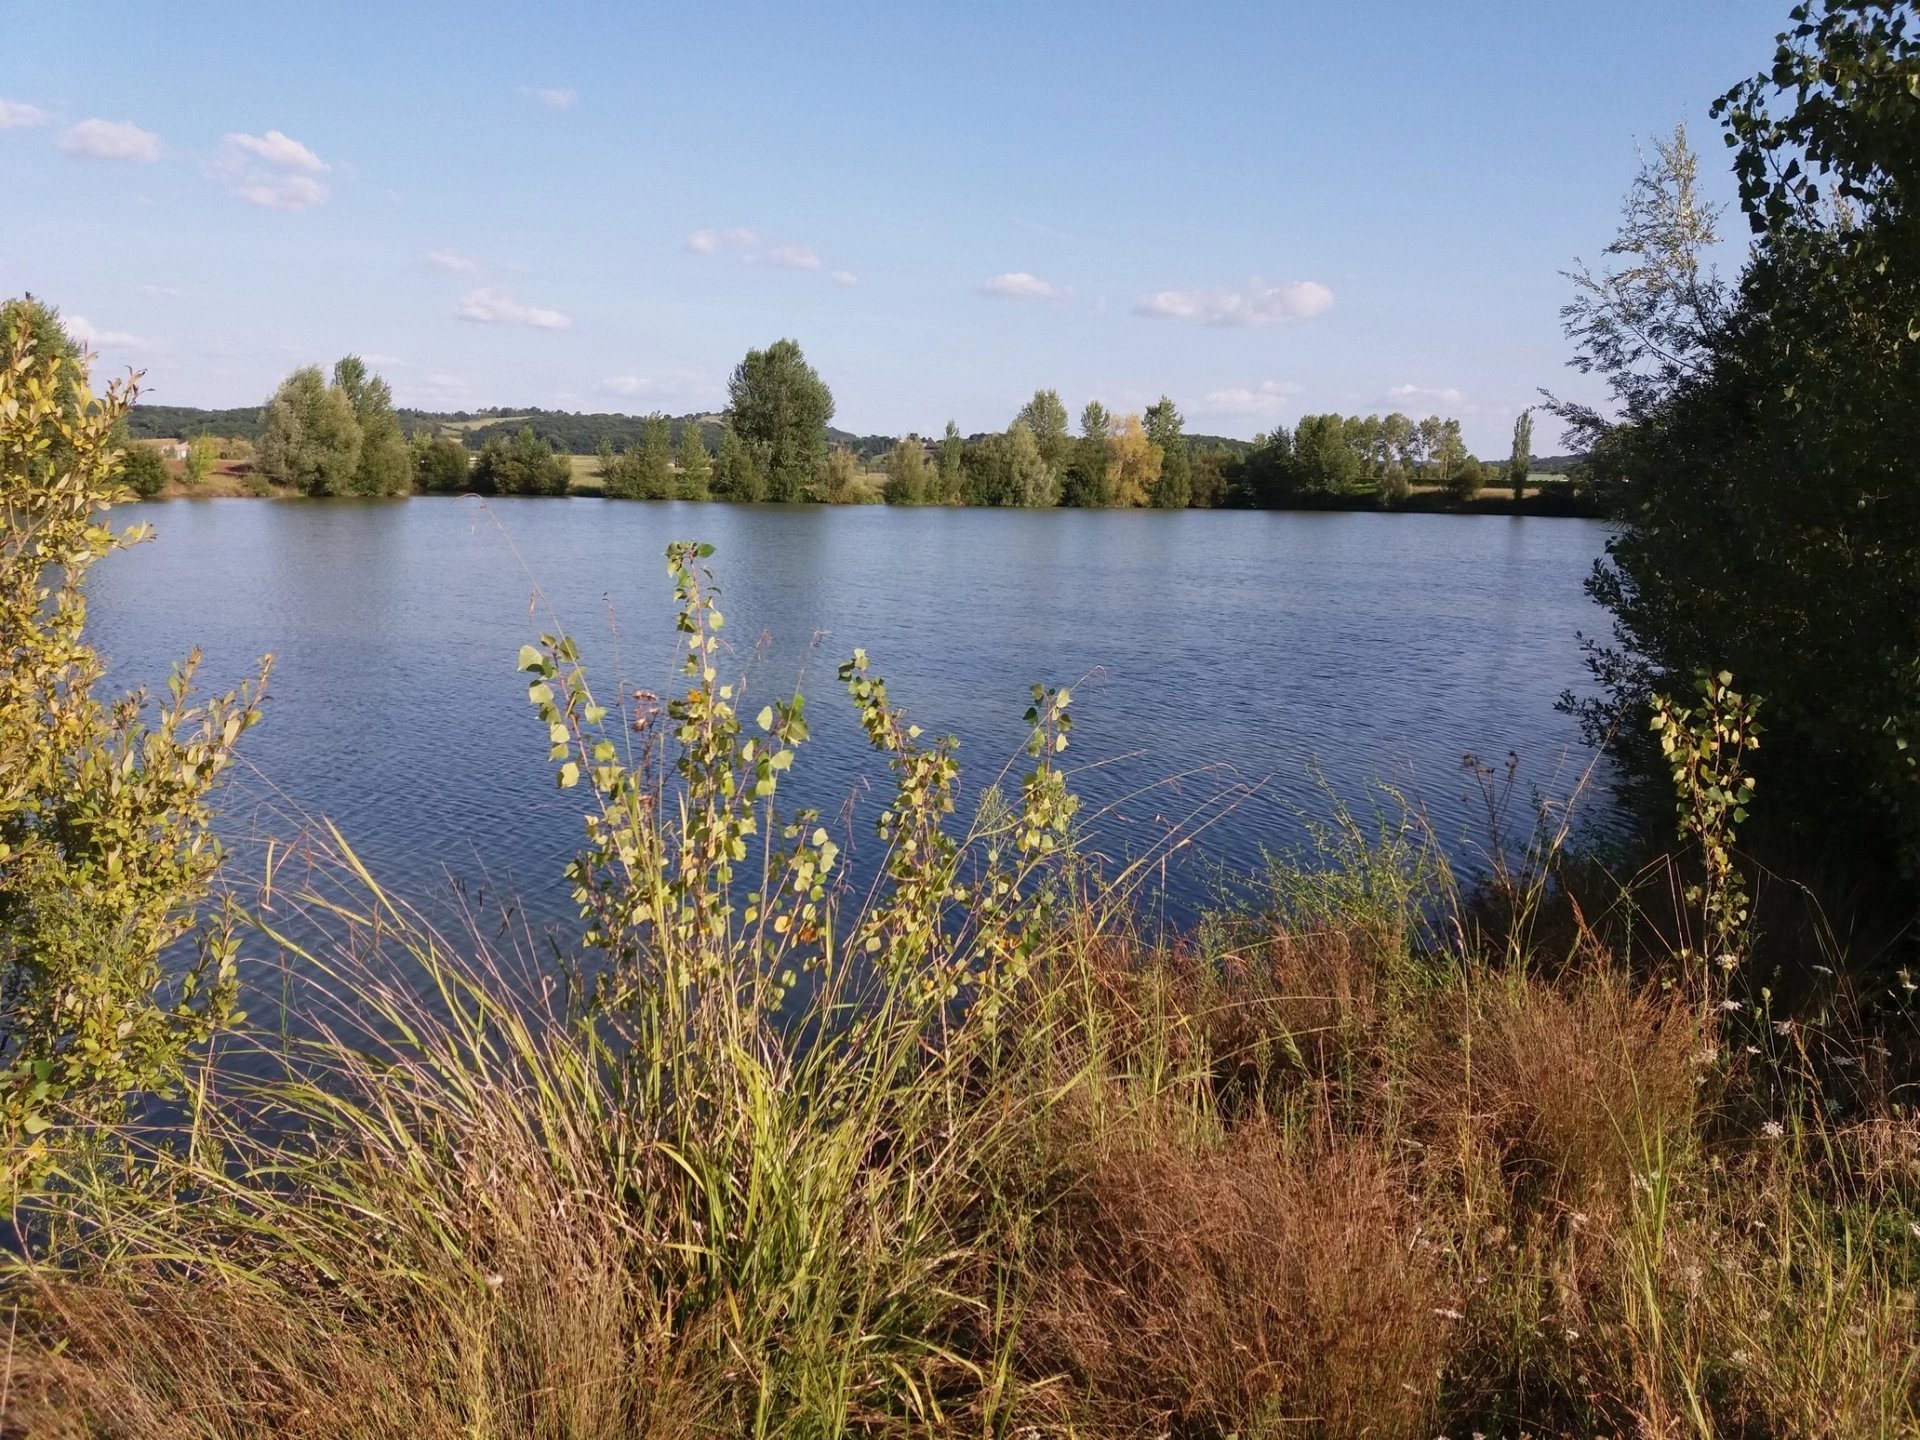 Nice clean lake of 7 hectares with carp surrounded by 8 hectares good land